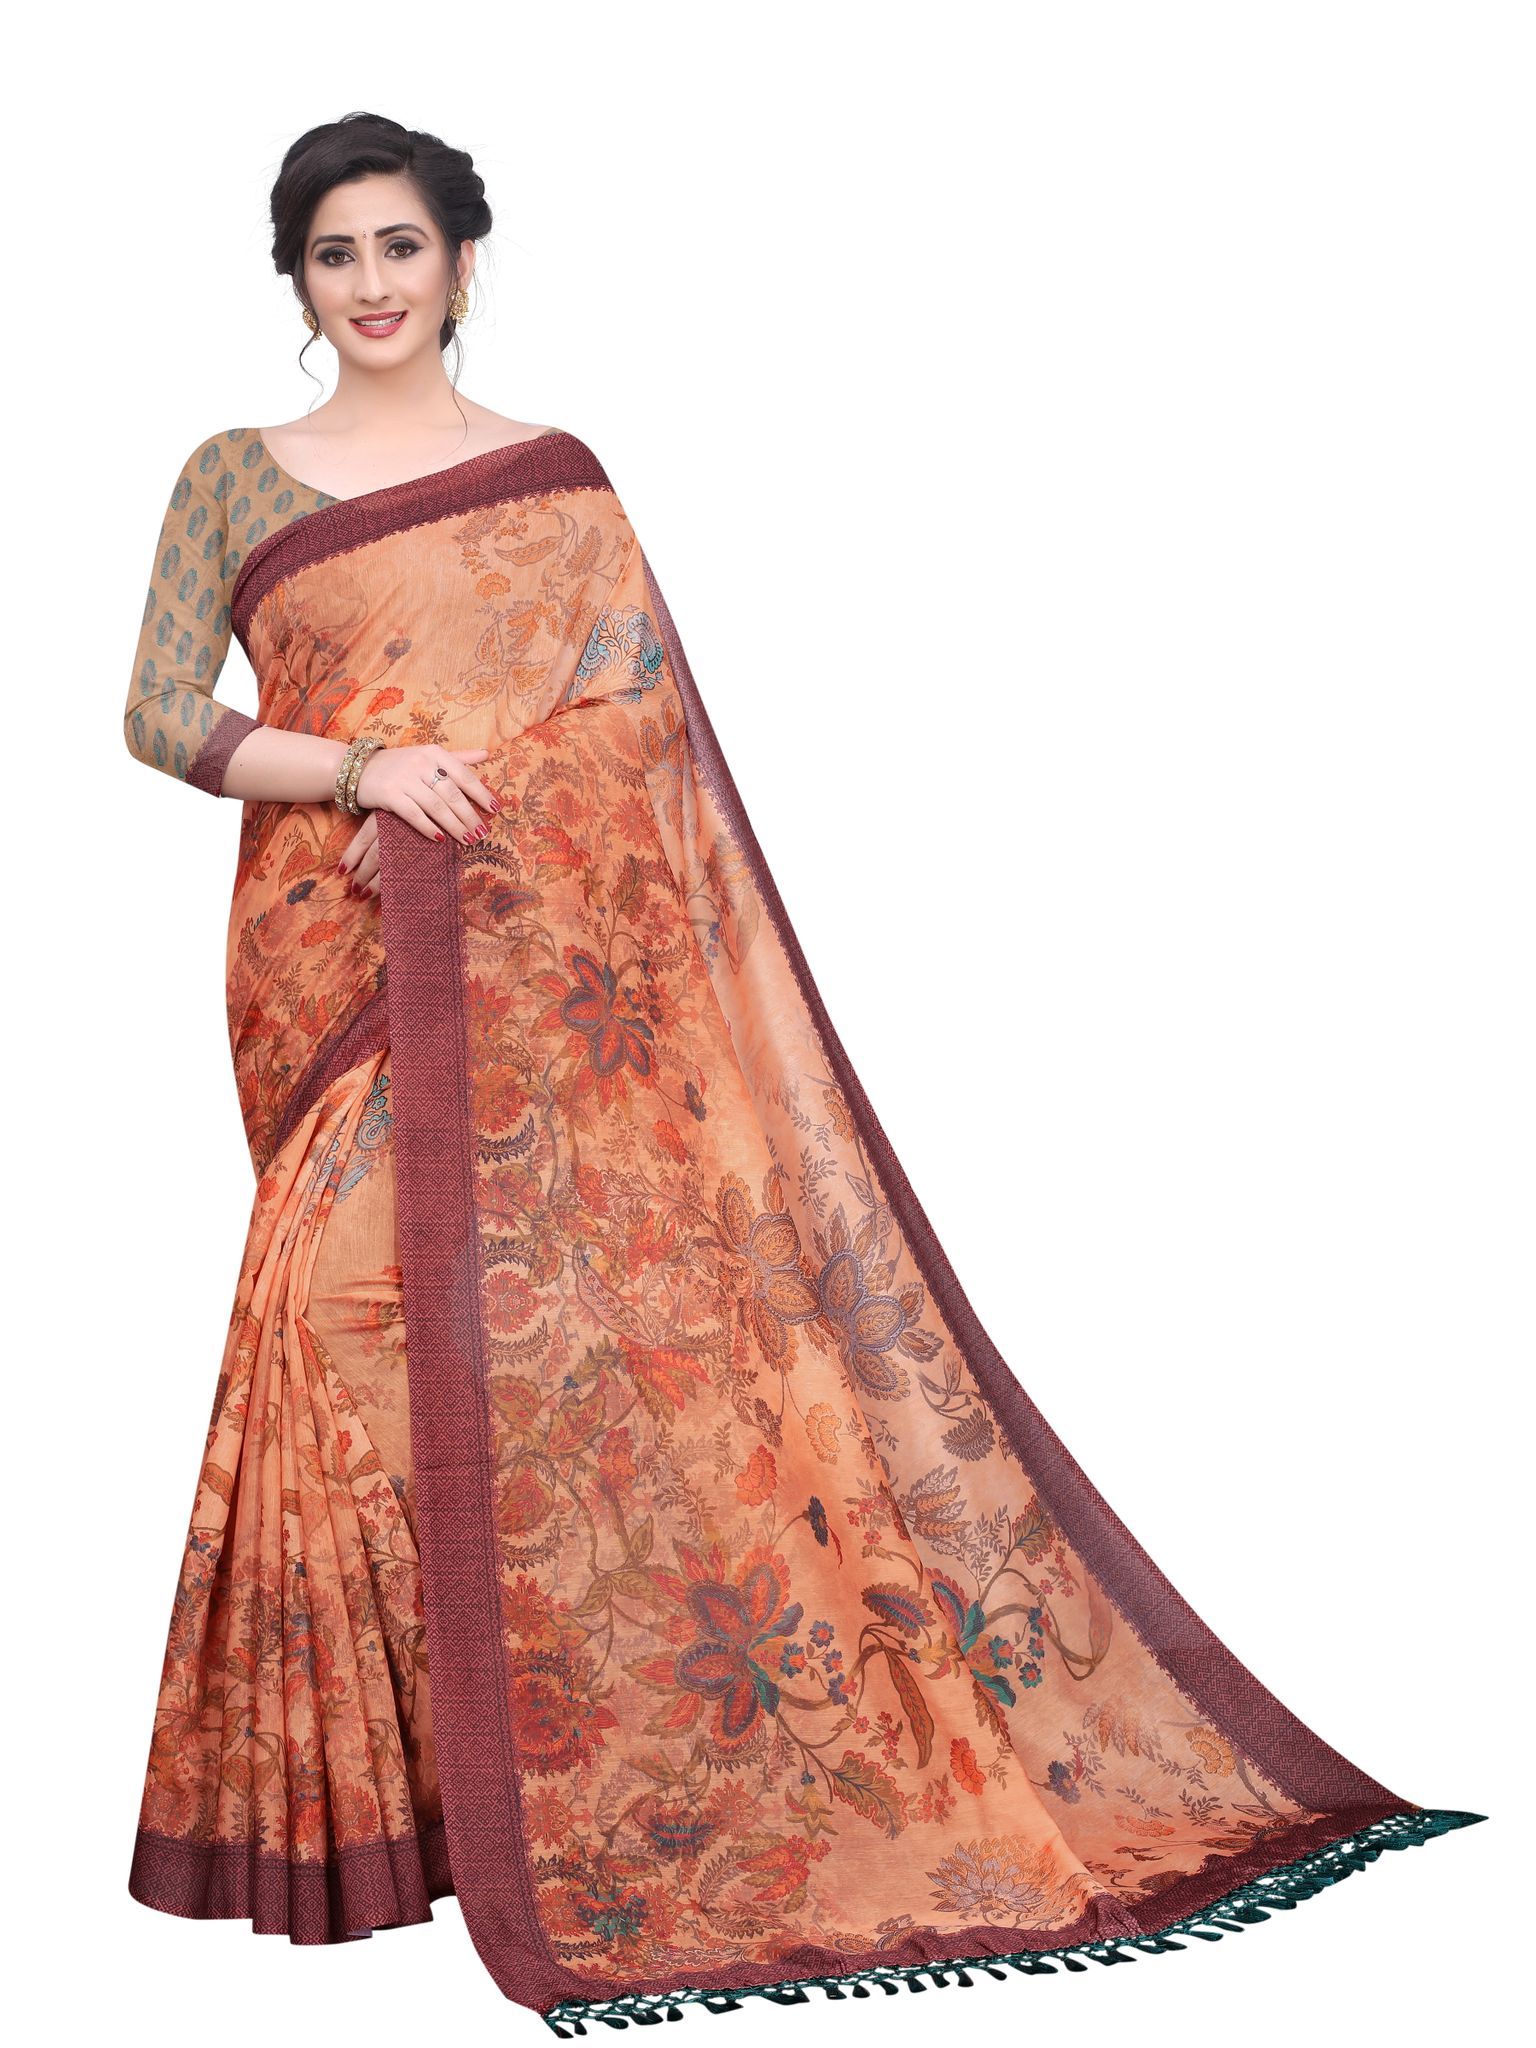 Silk Zone Women's Cotton Digital Printed Saree With Unstitched Blouse Piece